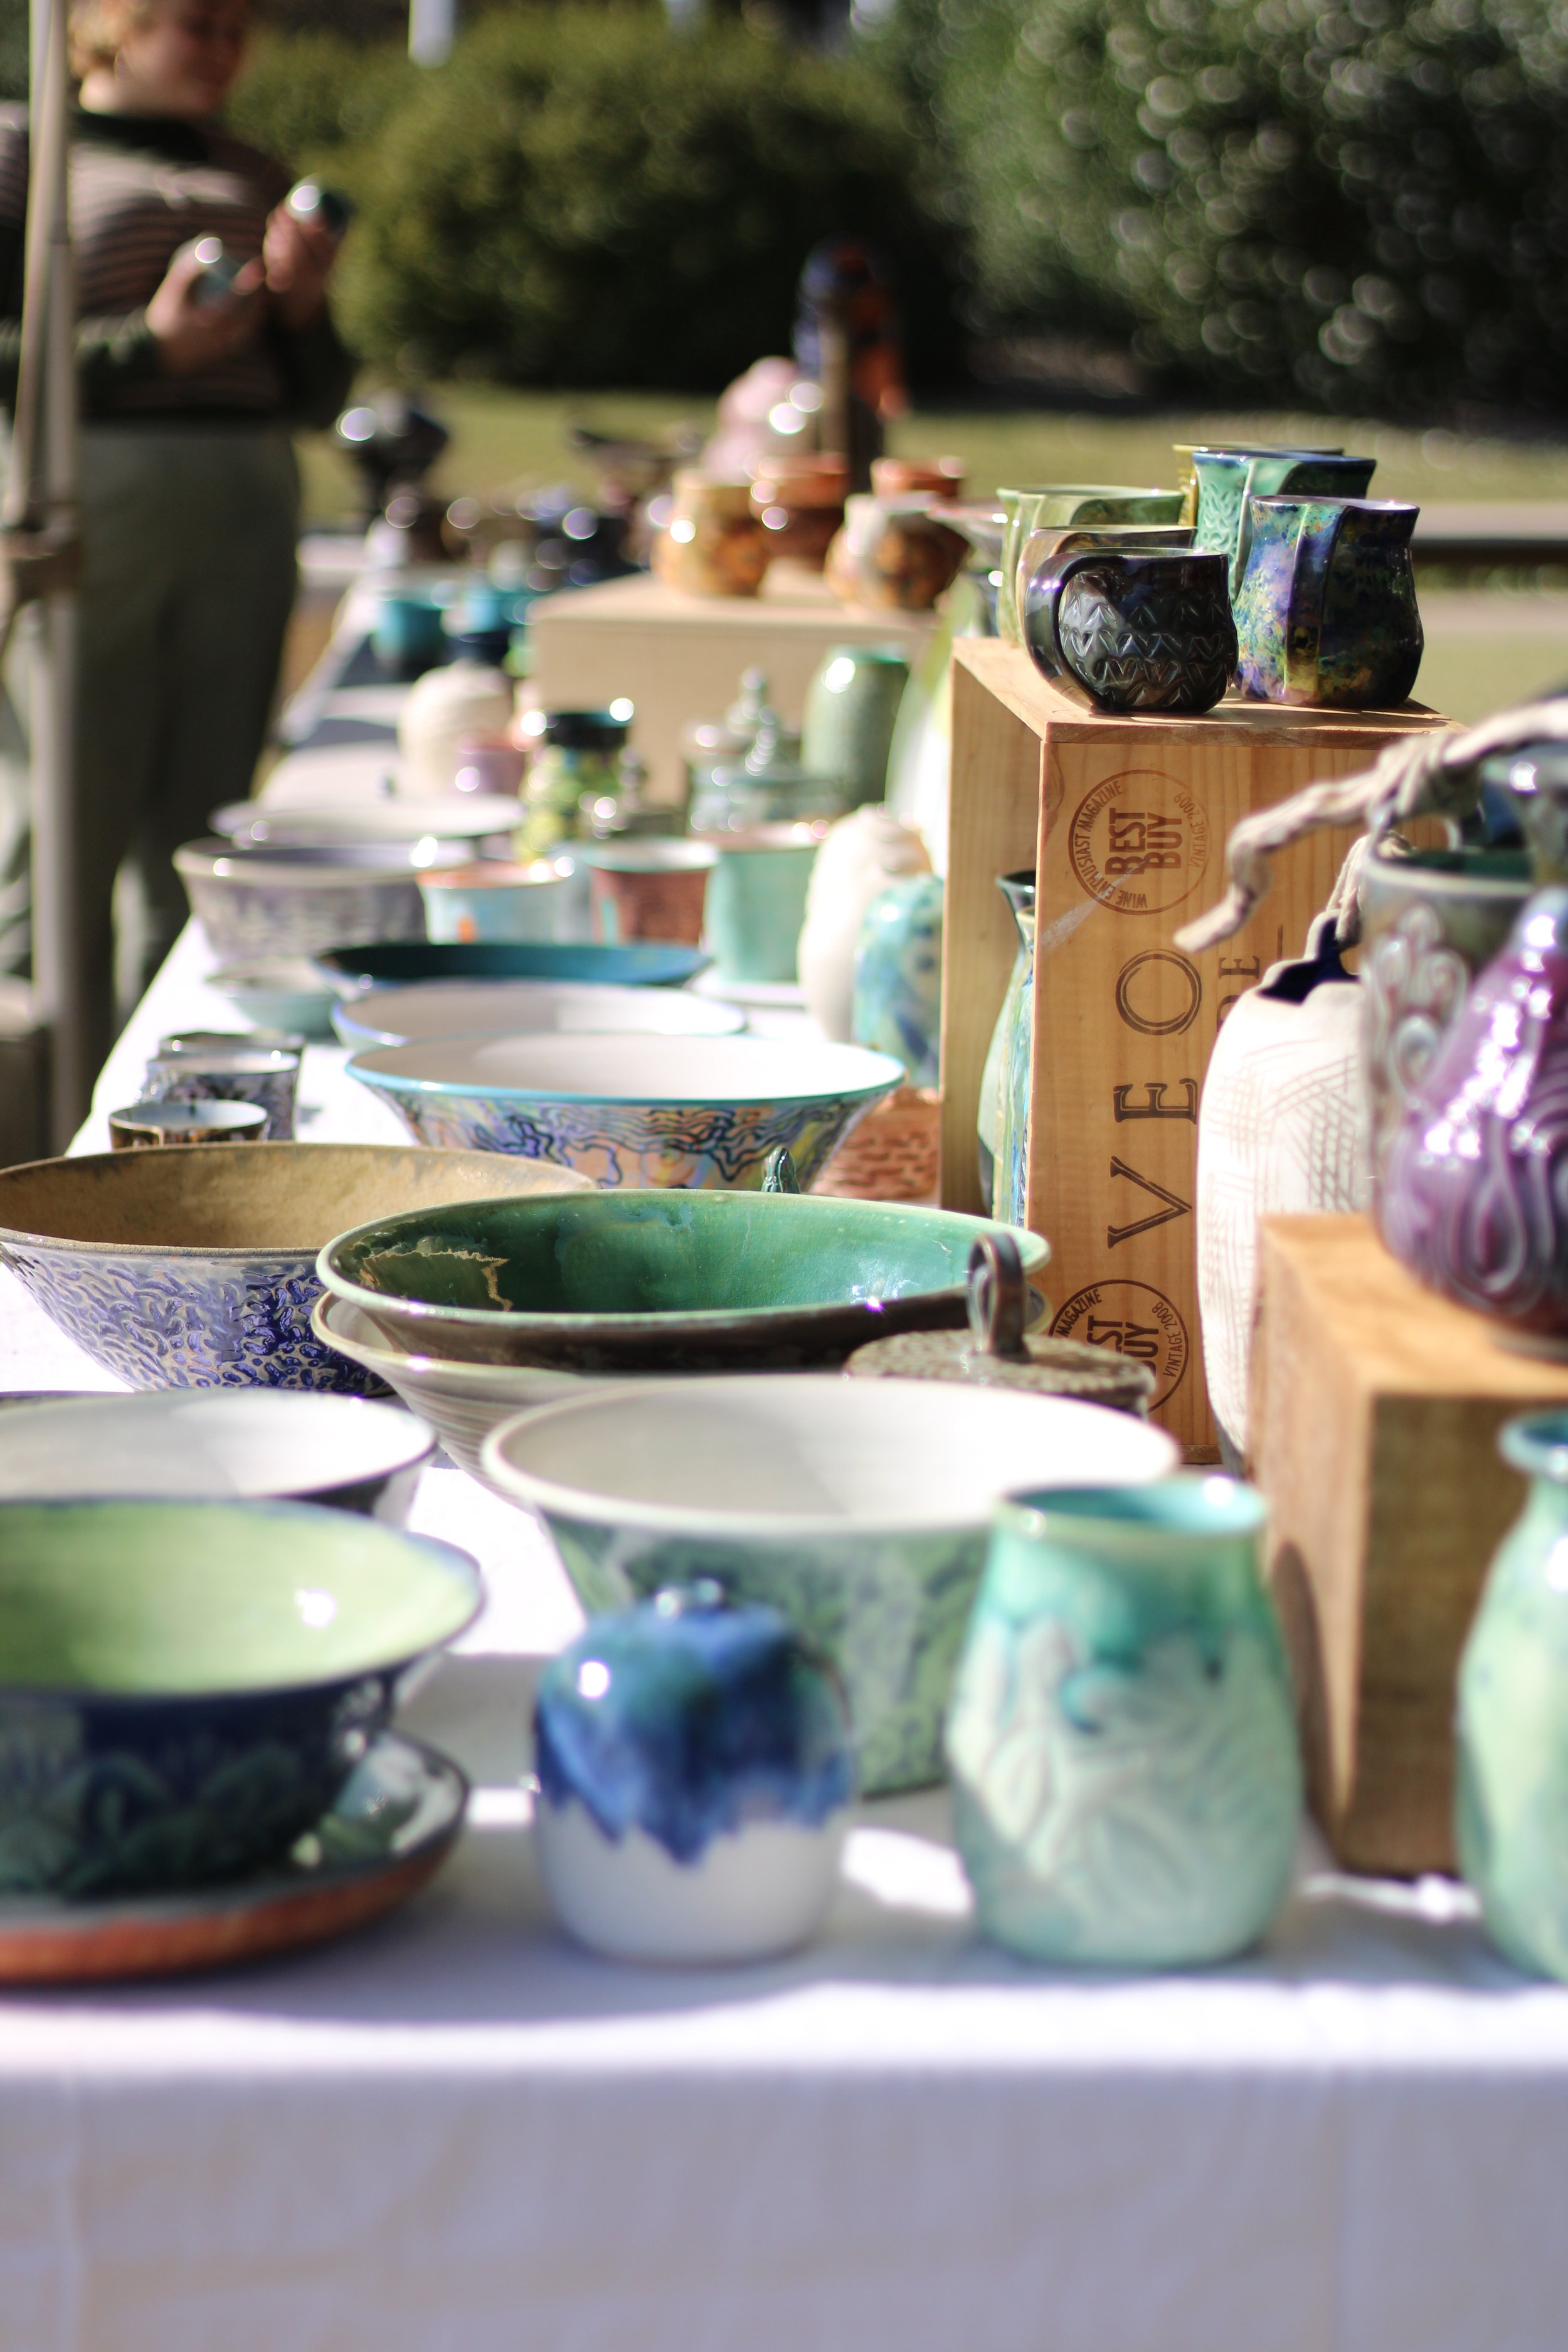  Potter Gerry O’Meara displayed her handcrafted items for sale Monday, Nov. 14. 